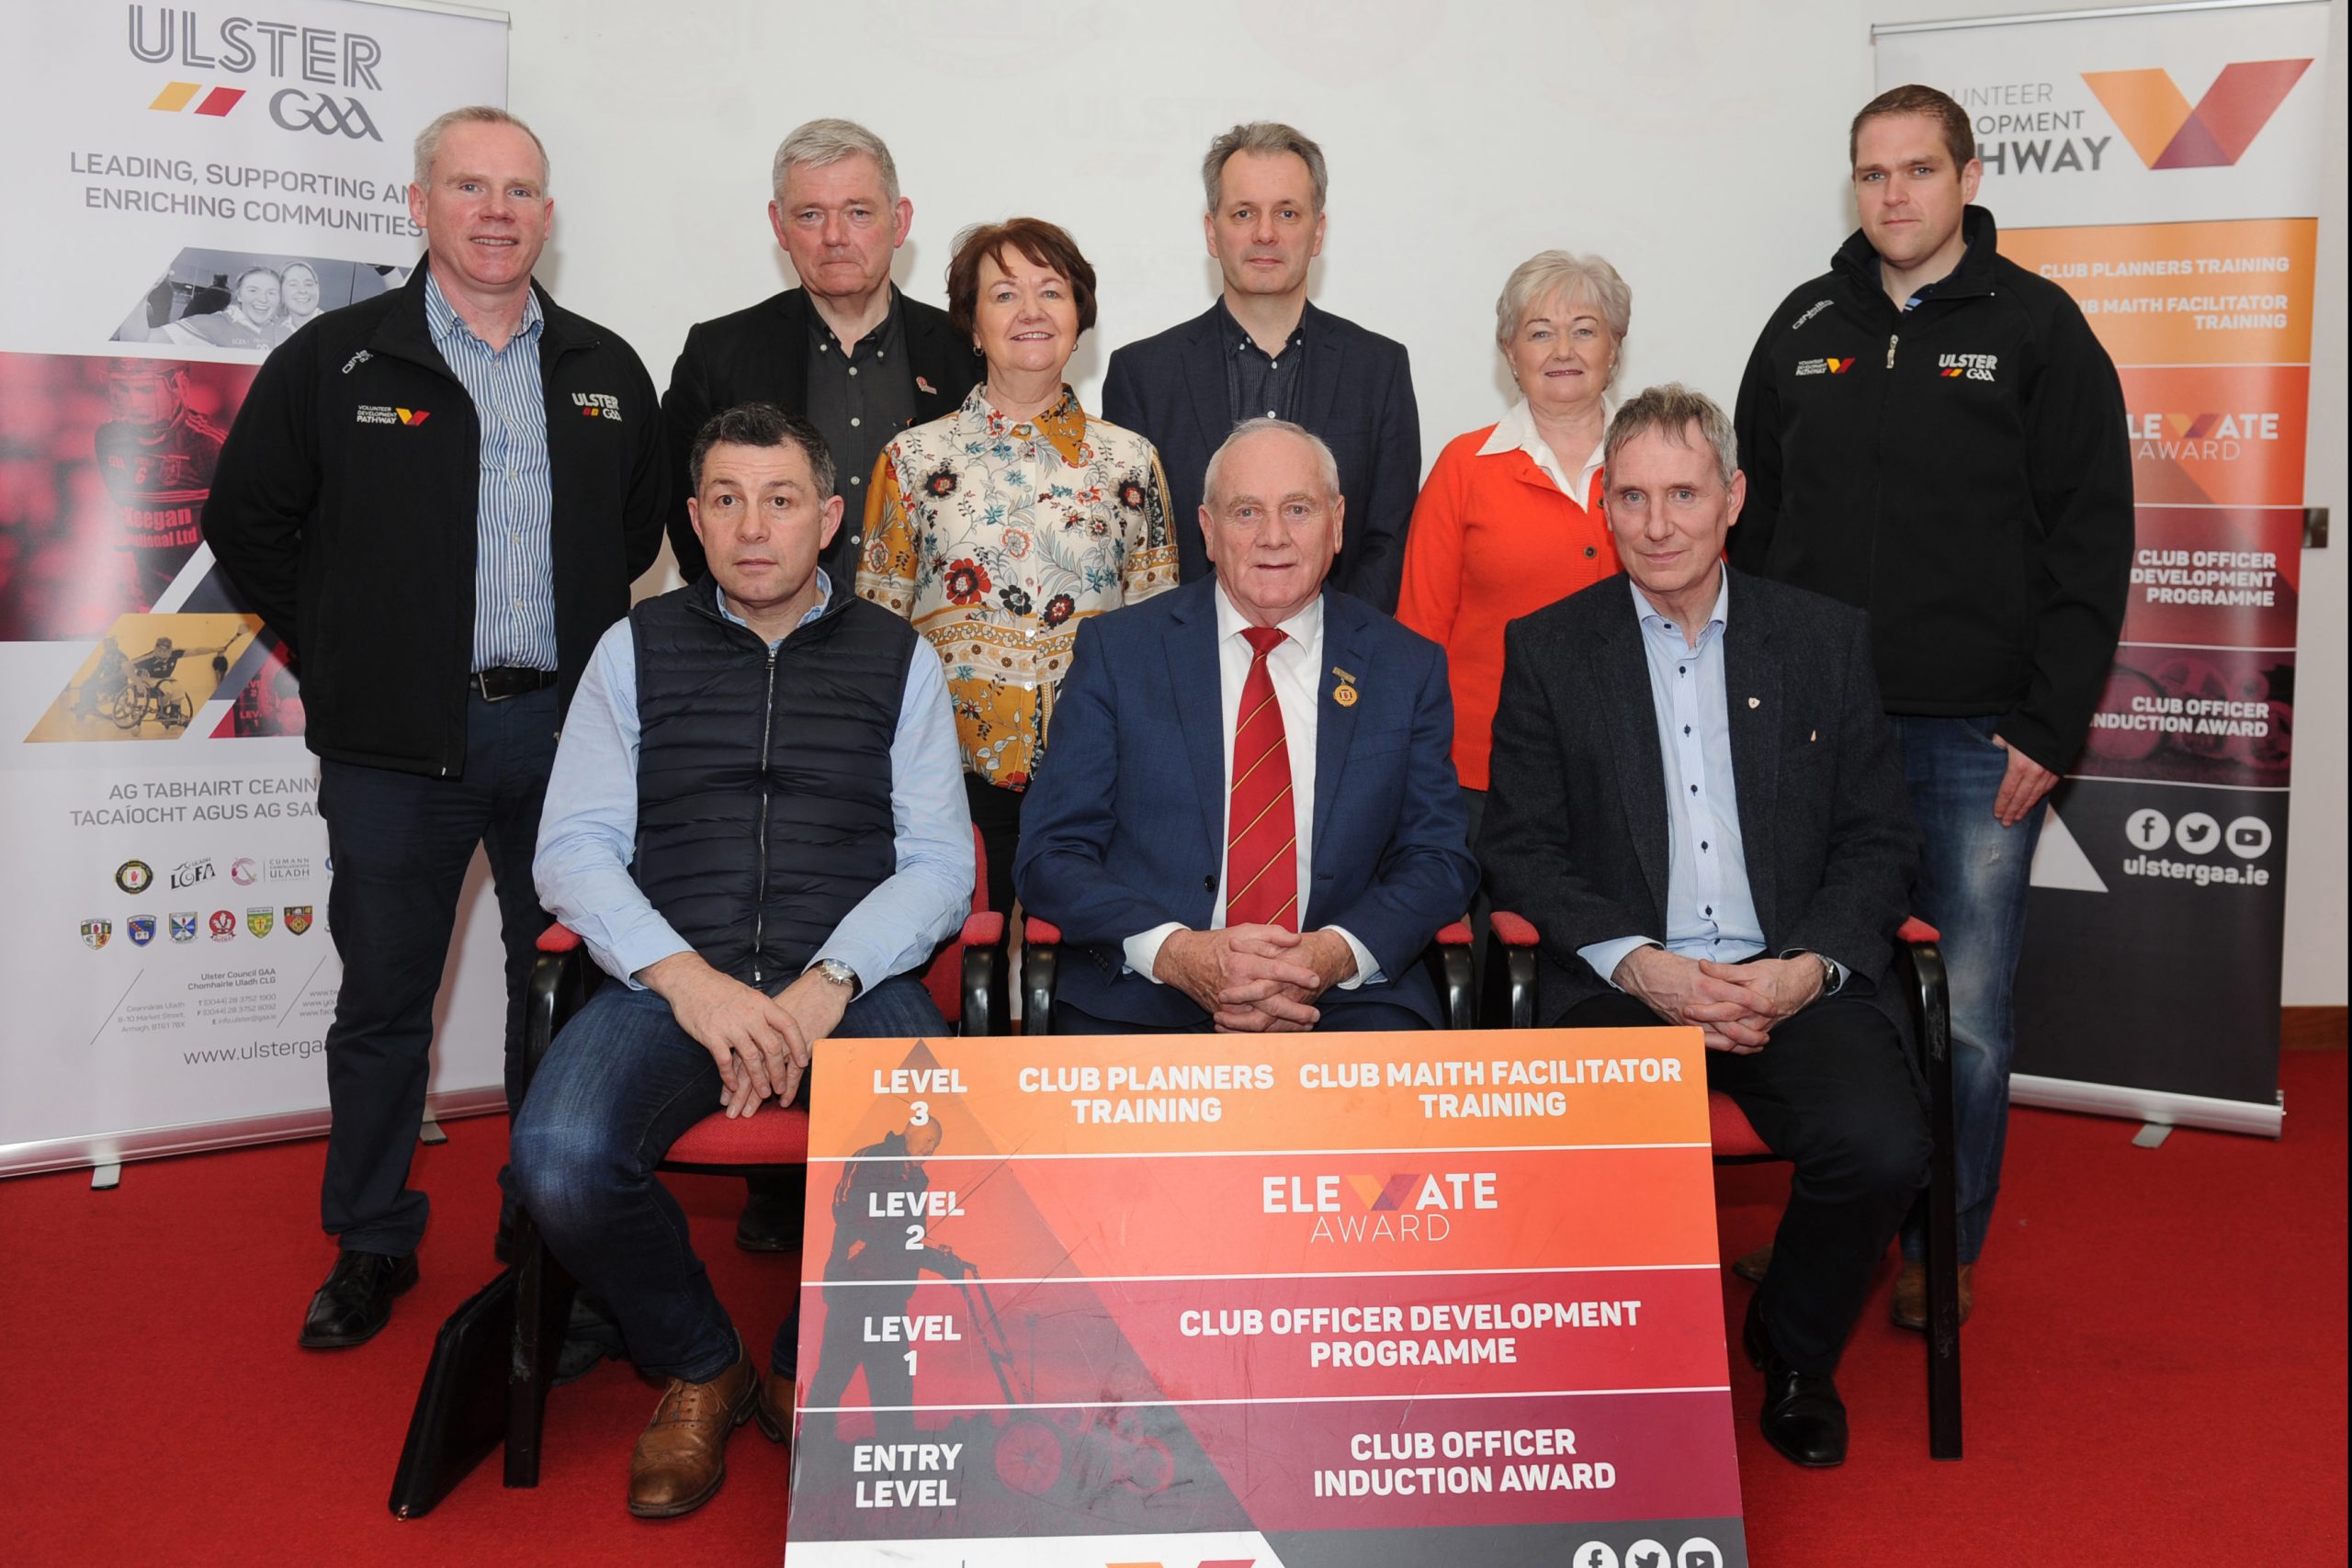 Magnificent Seven clubs achieve Elevate Award